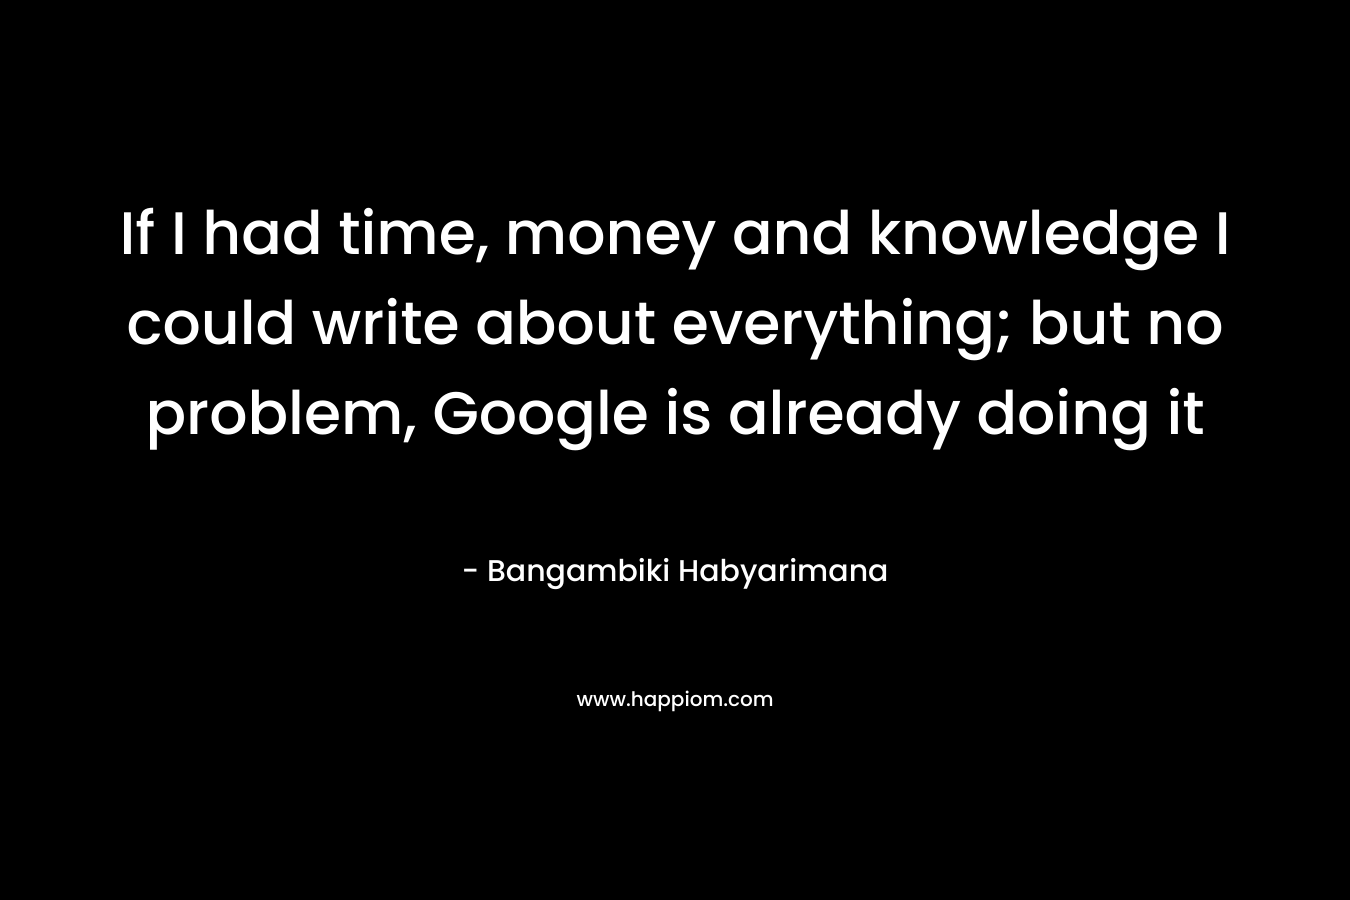 If I had time, money and knowledge I could write about everything; but no problem, Google is already doing it